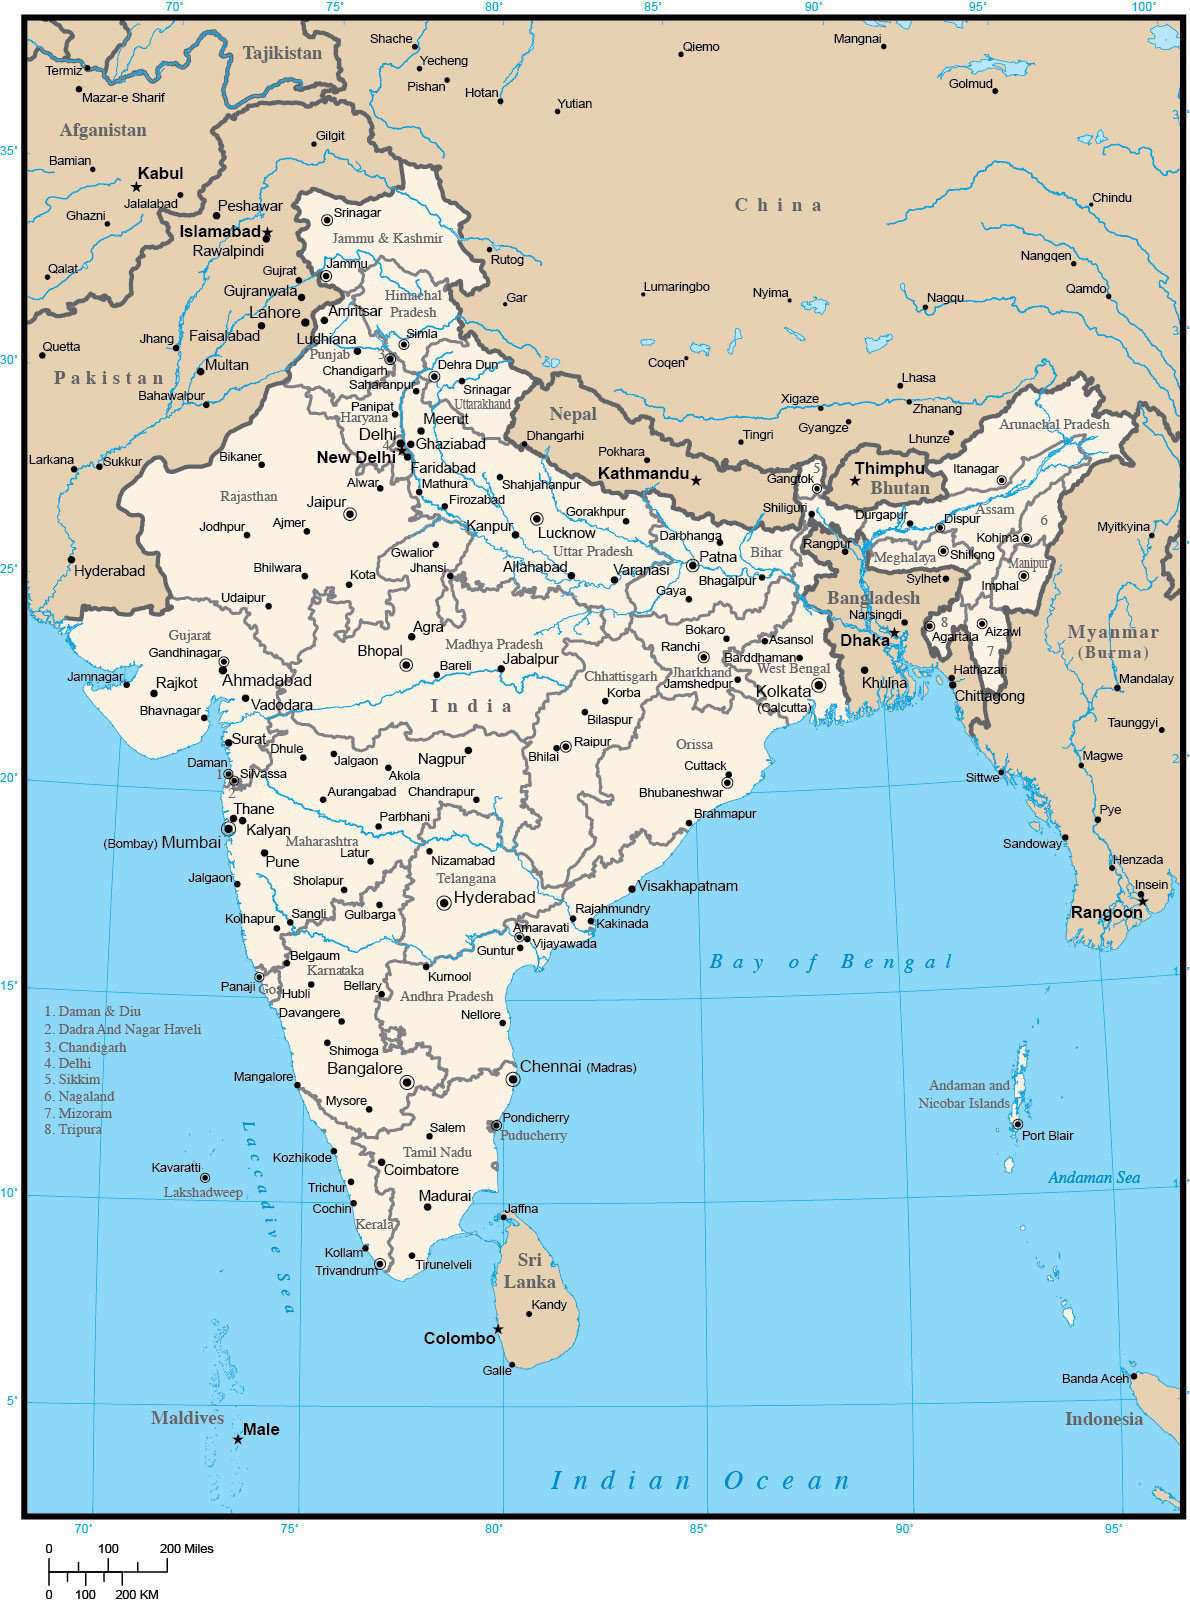 List of Indian States and Capitals with Map, Union Territories